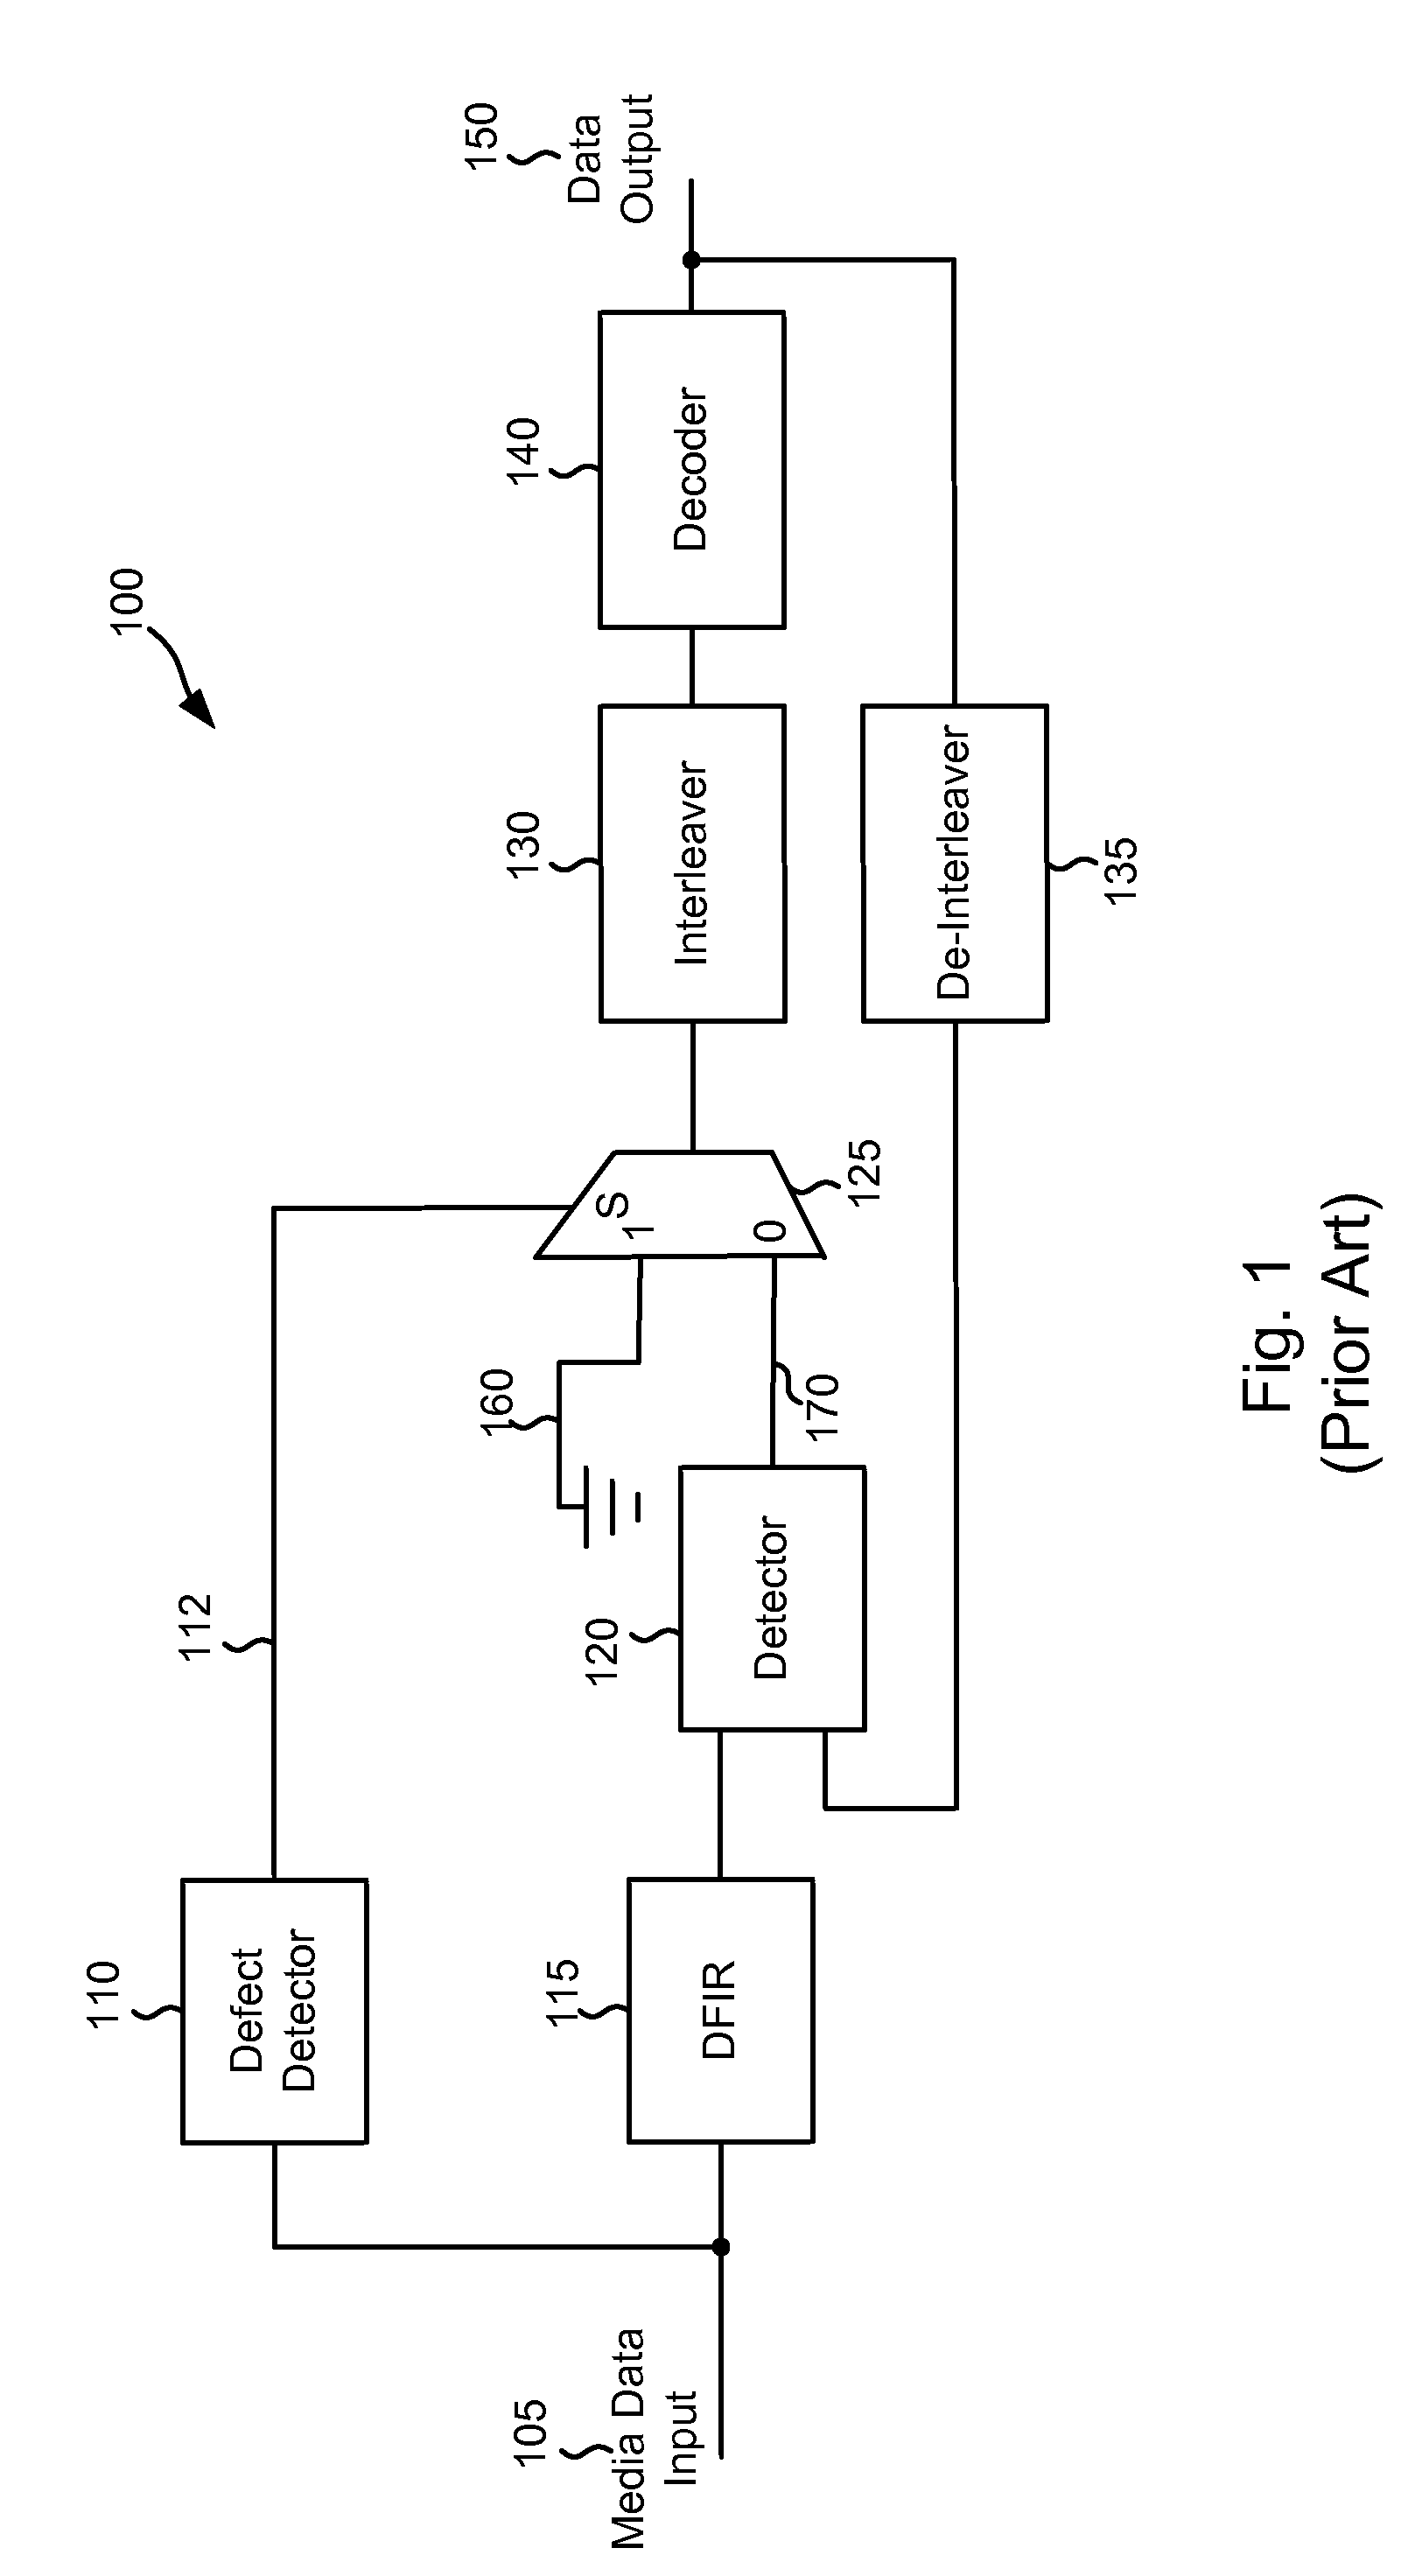 Systems and Methods for Regenerating Data from a Defective Medium